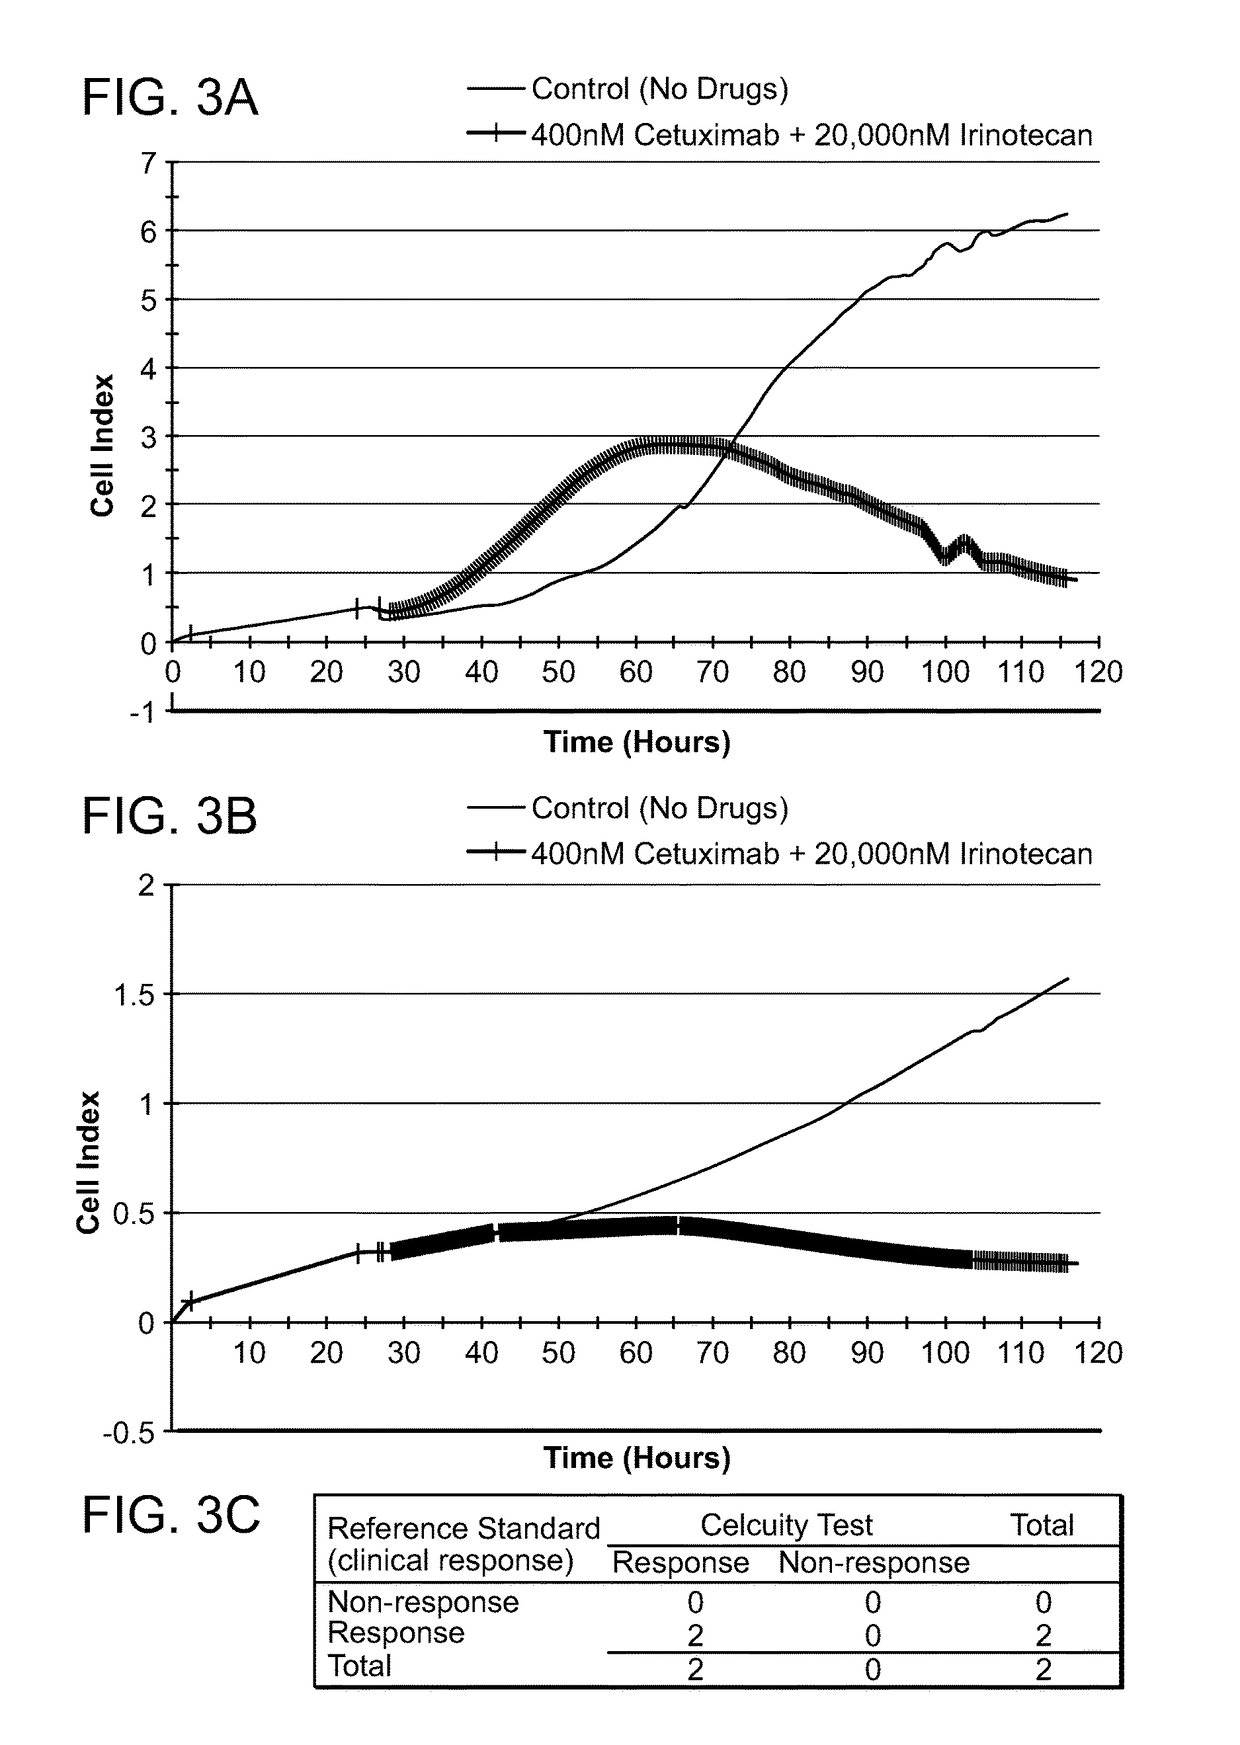 Methods of measuring erbb signaling pathway activity to diagnose and treat cancer patients